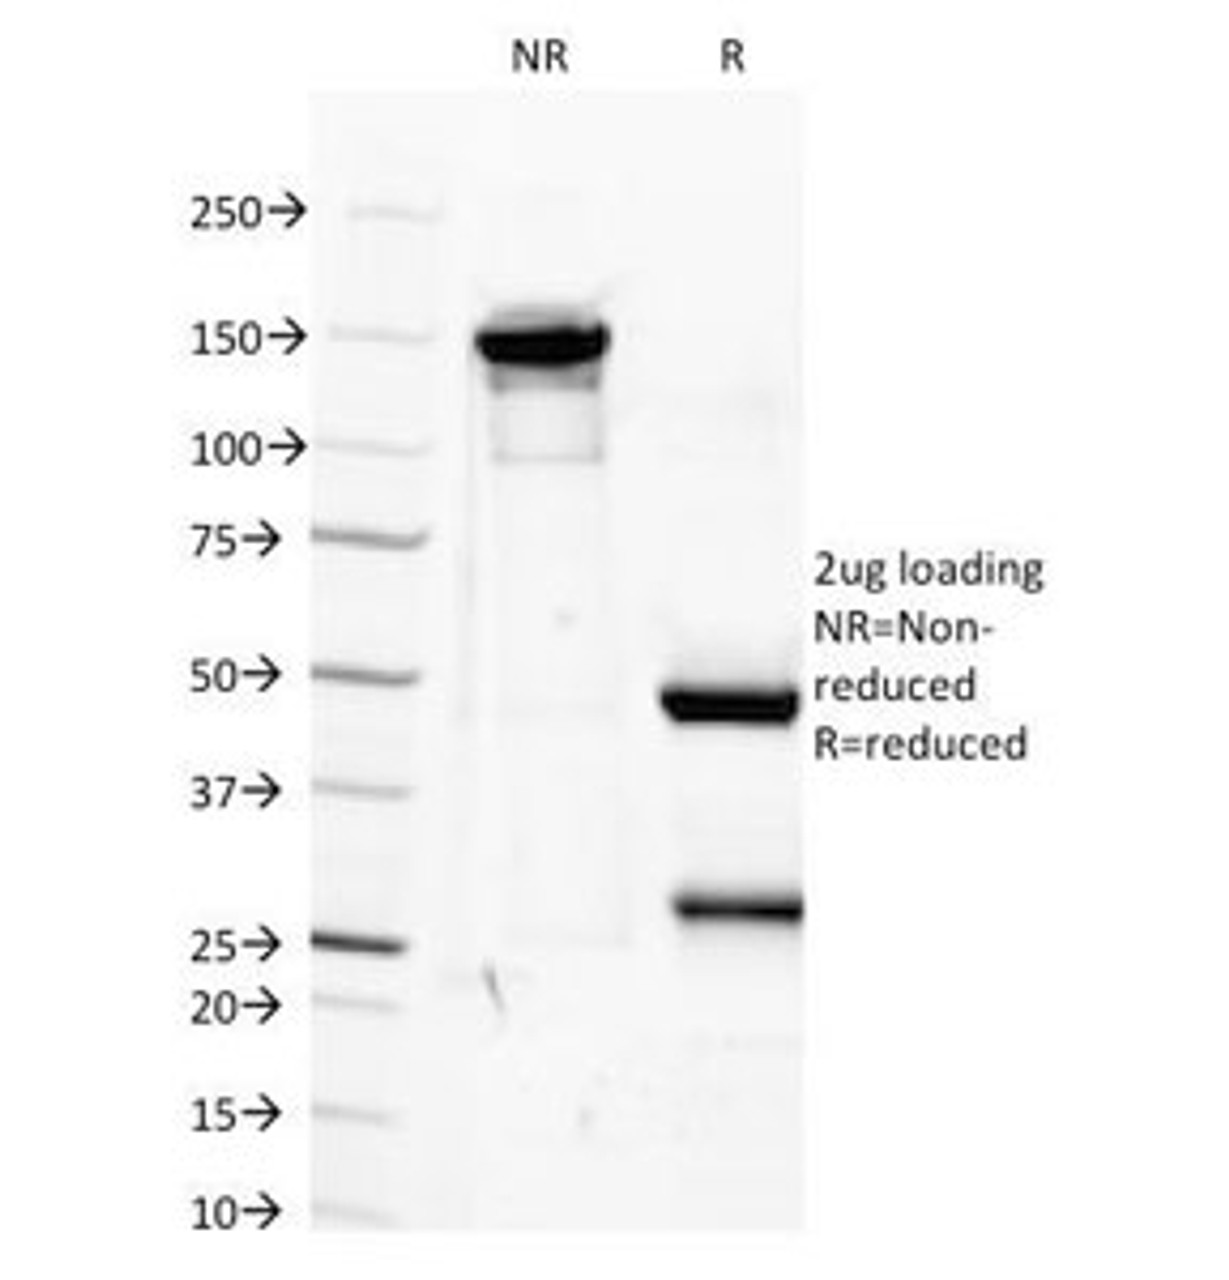 SDS-PAGE Analysis of Purified, BSA-Free IGF1 Antibody (clone M23) . Confirmation of Integrity and Purity of the Antibody.